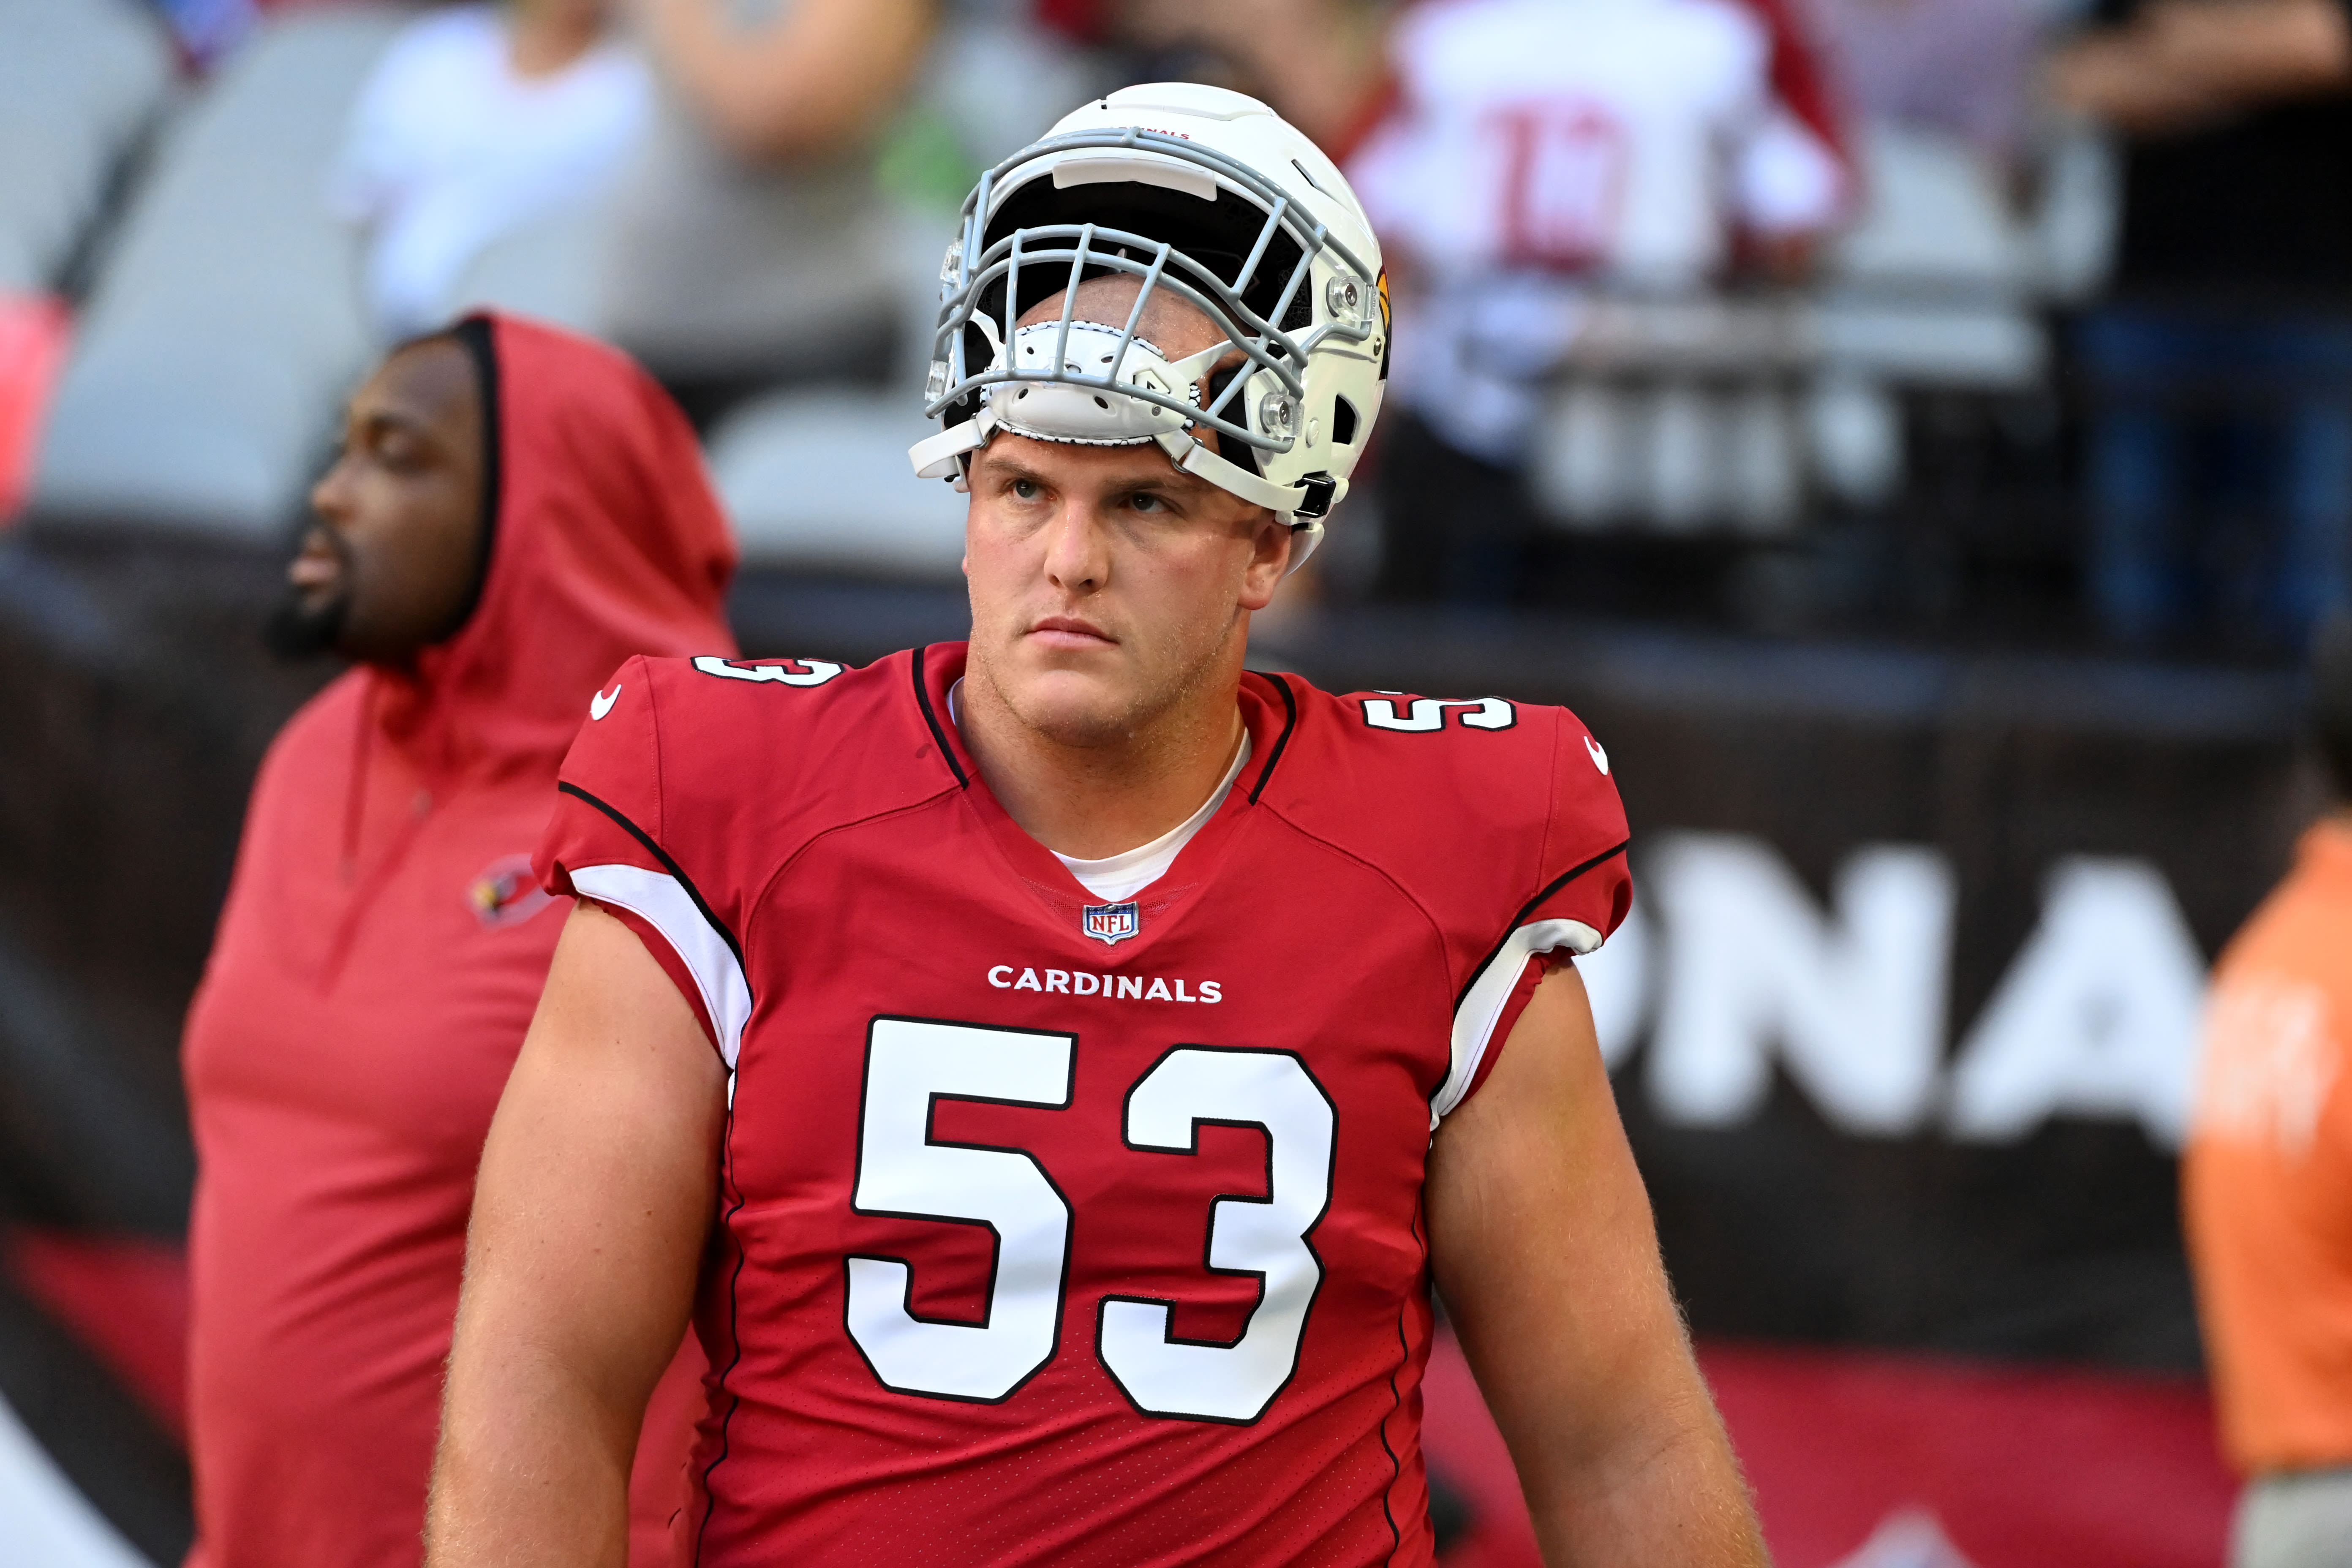 Former first-rounder Billy Price announces retirement at 29 after pulmonary embolism